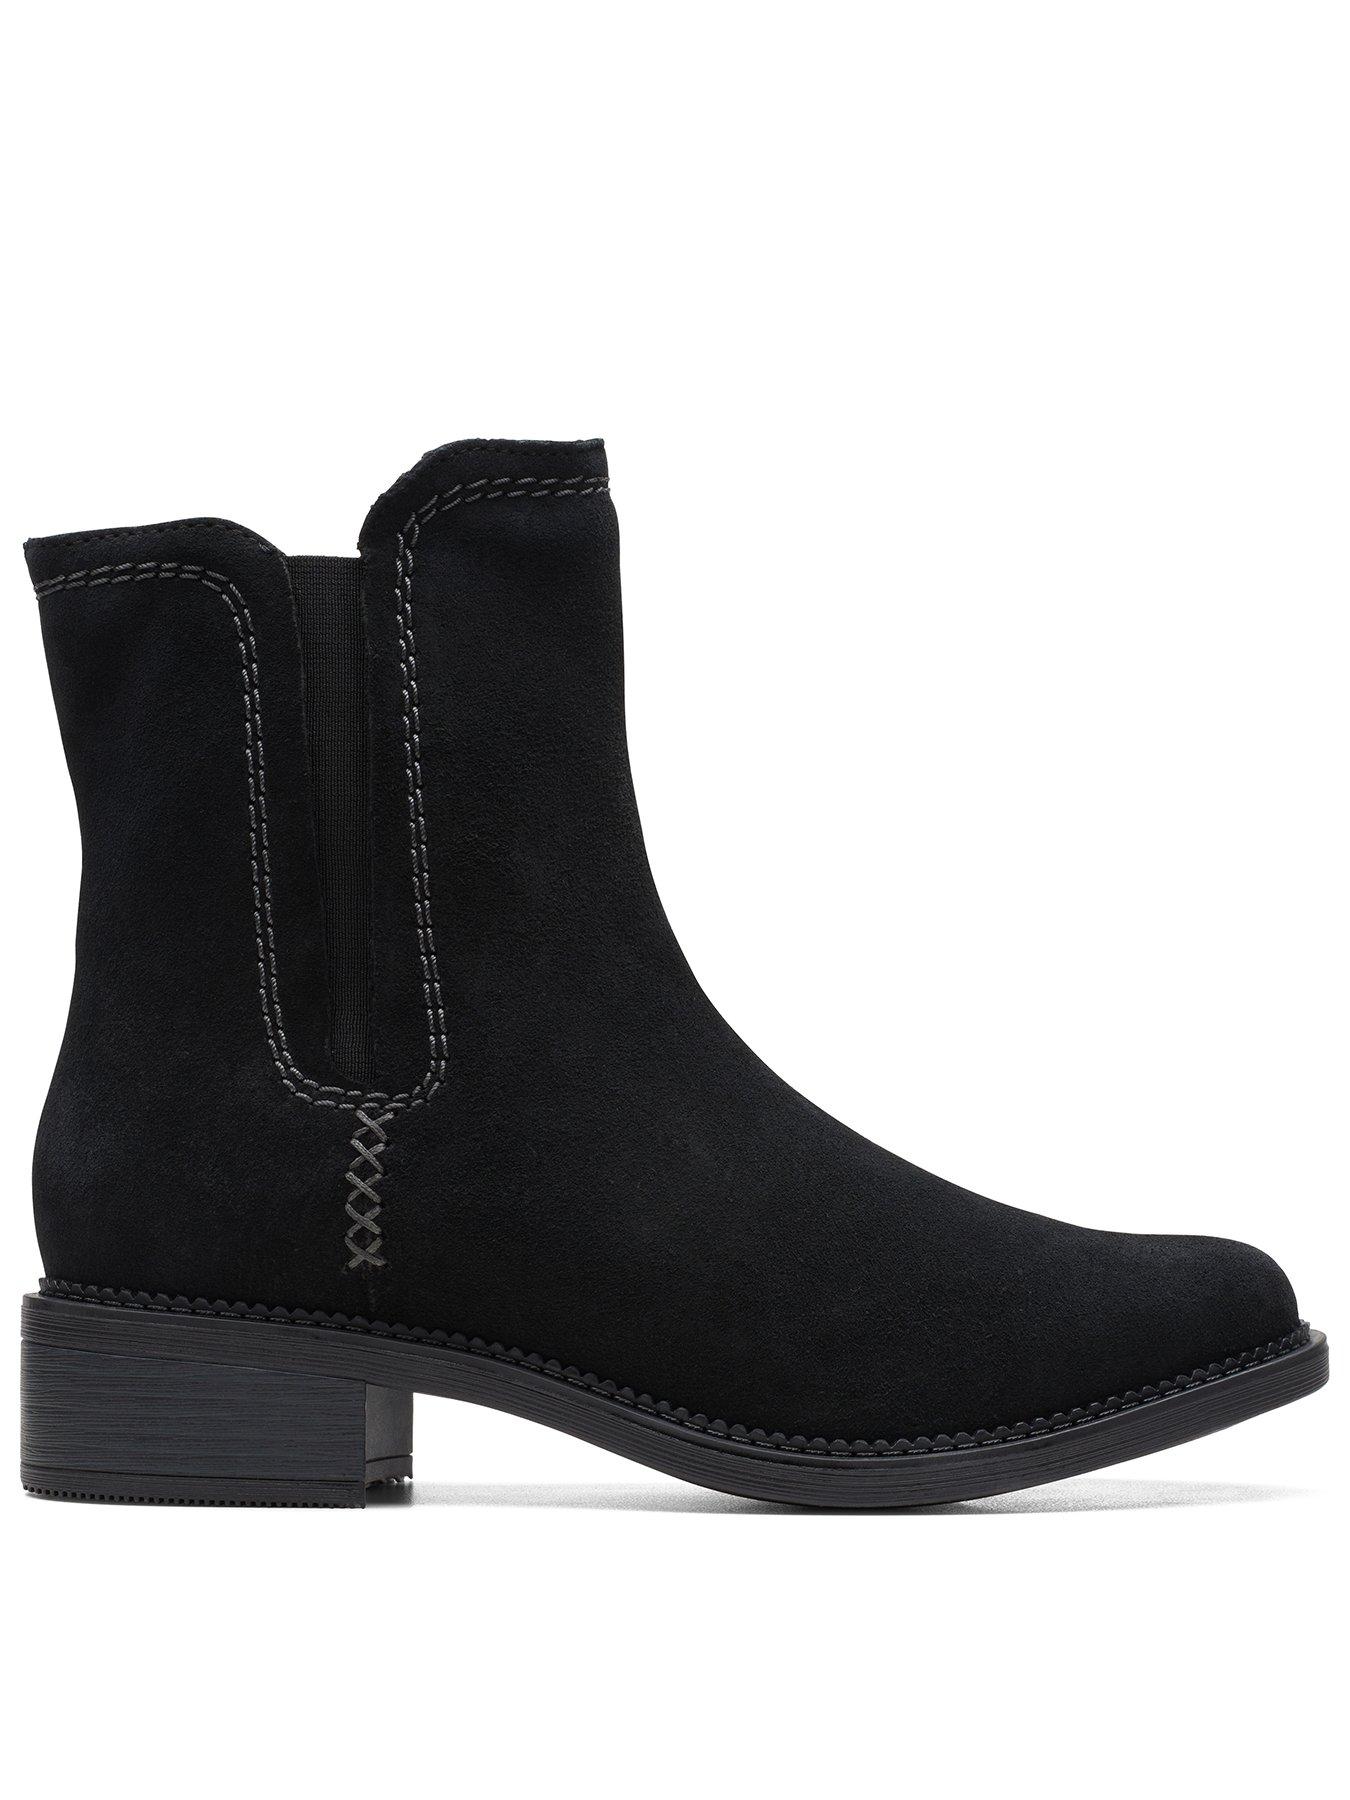 Clarks Boots | Clarks Boots |